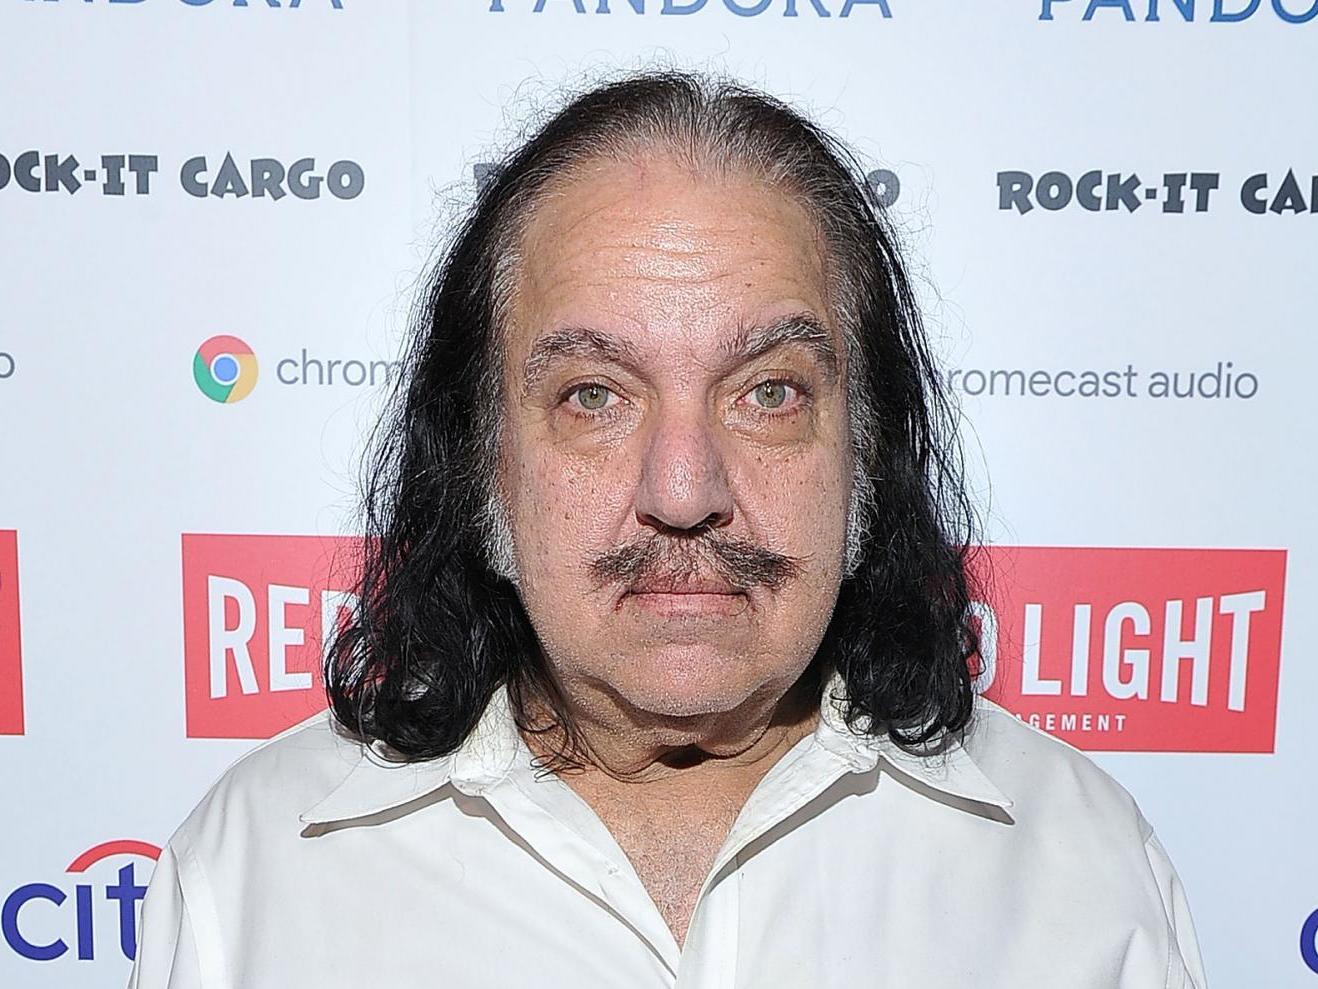 Ron Jeremy Porn Star Charged With Raping Three Women…